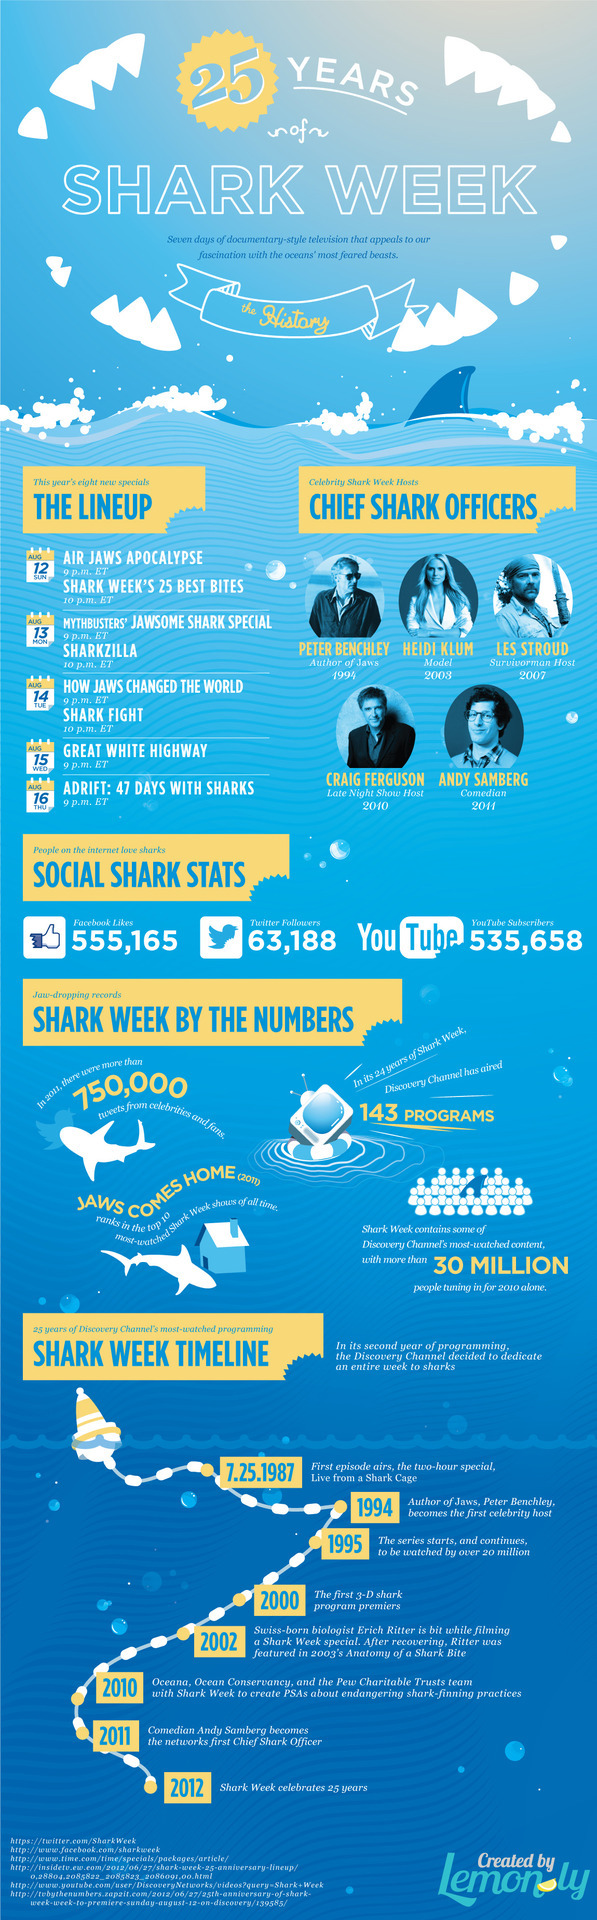 infographicjournal:
“ 25 Years of Shark Week
”
My life begins tomorrow at 9 p.m. and it feels so good.